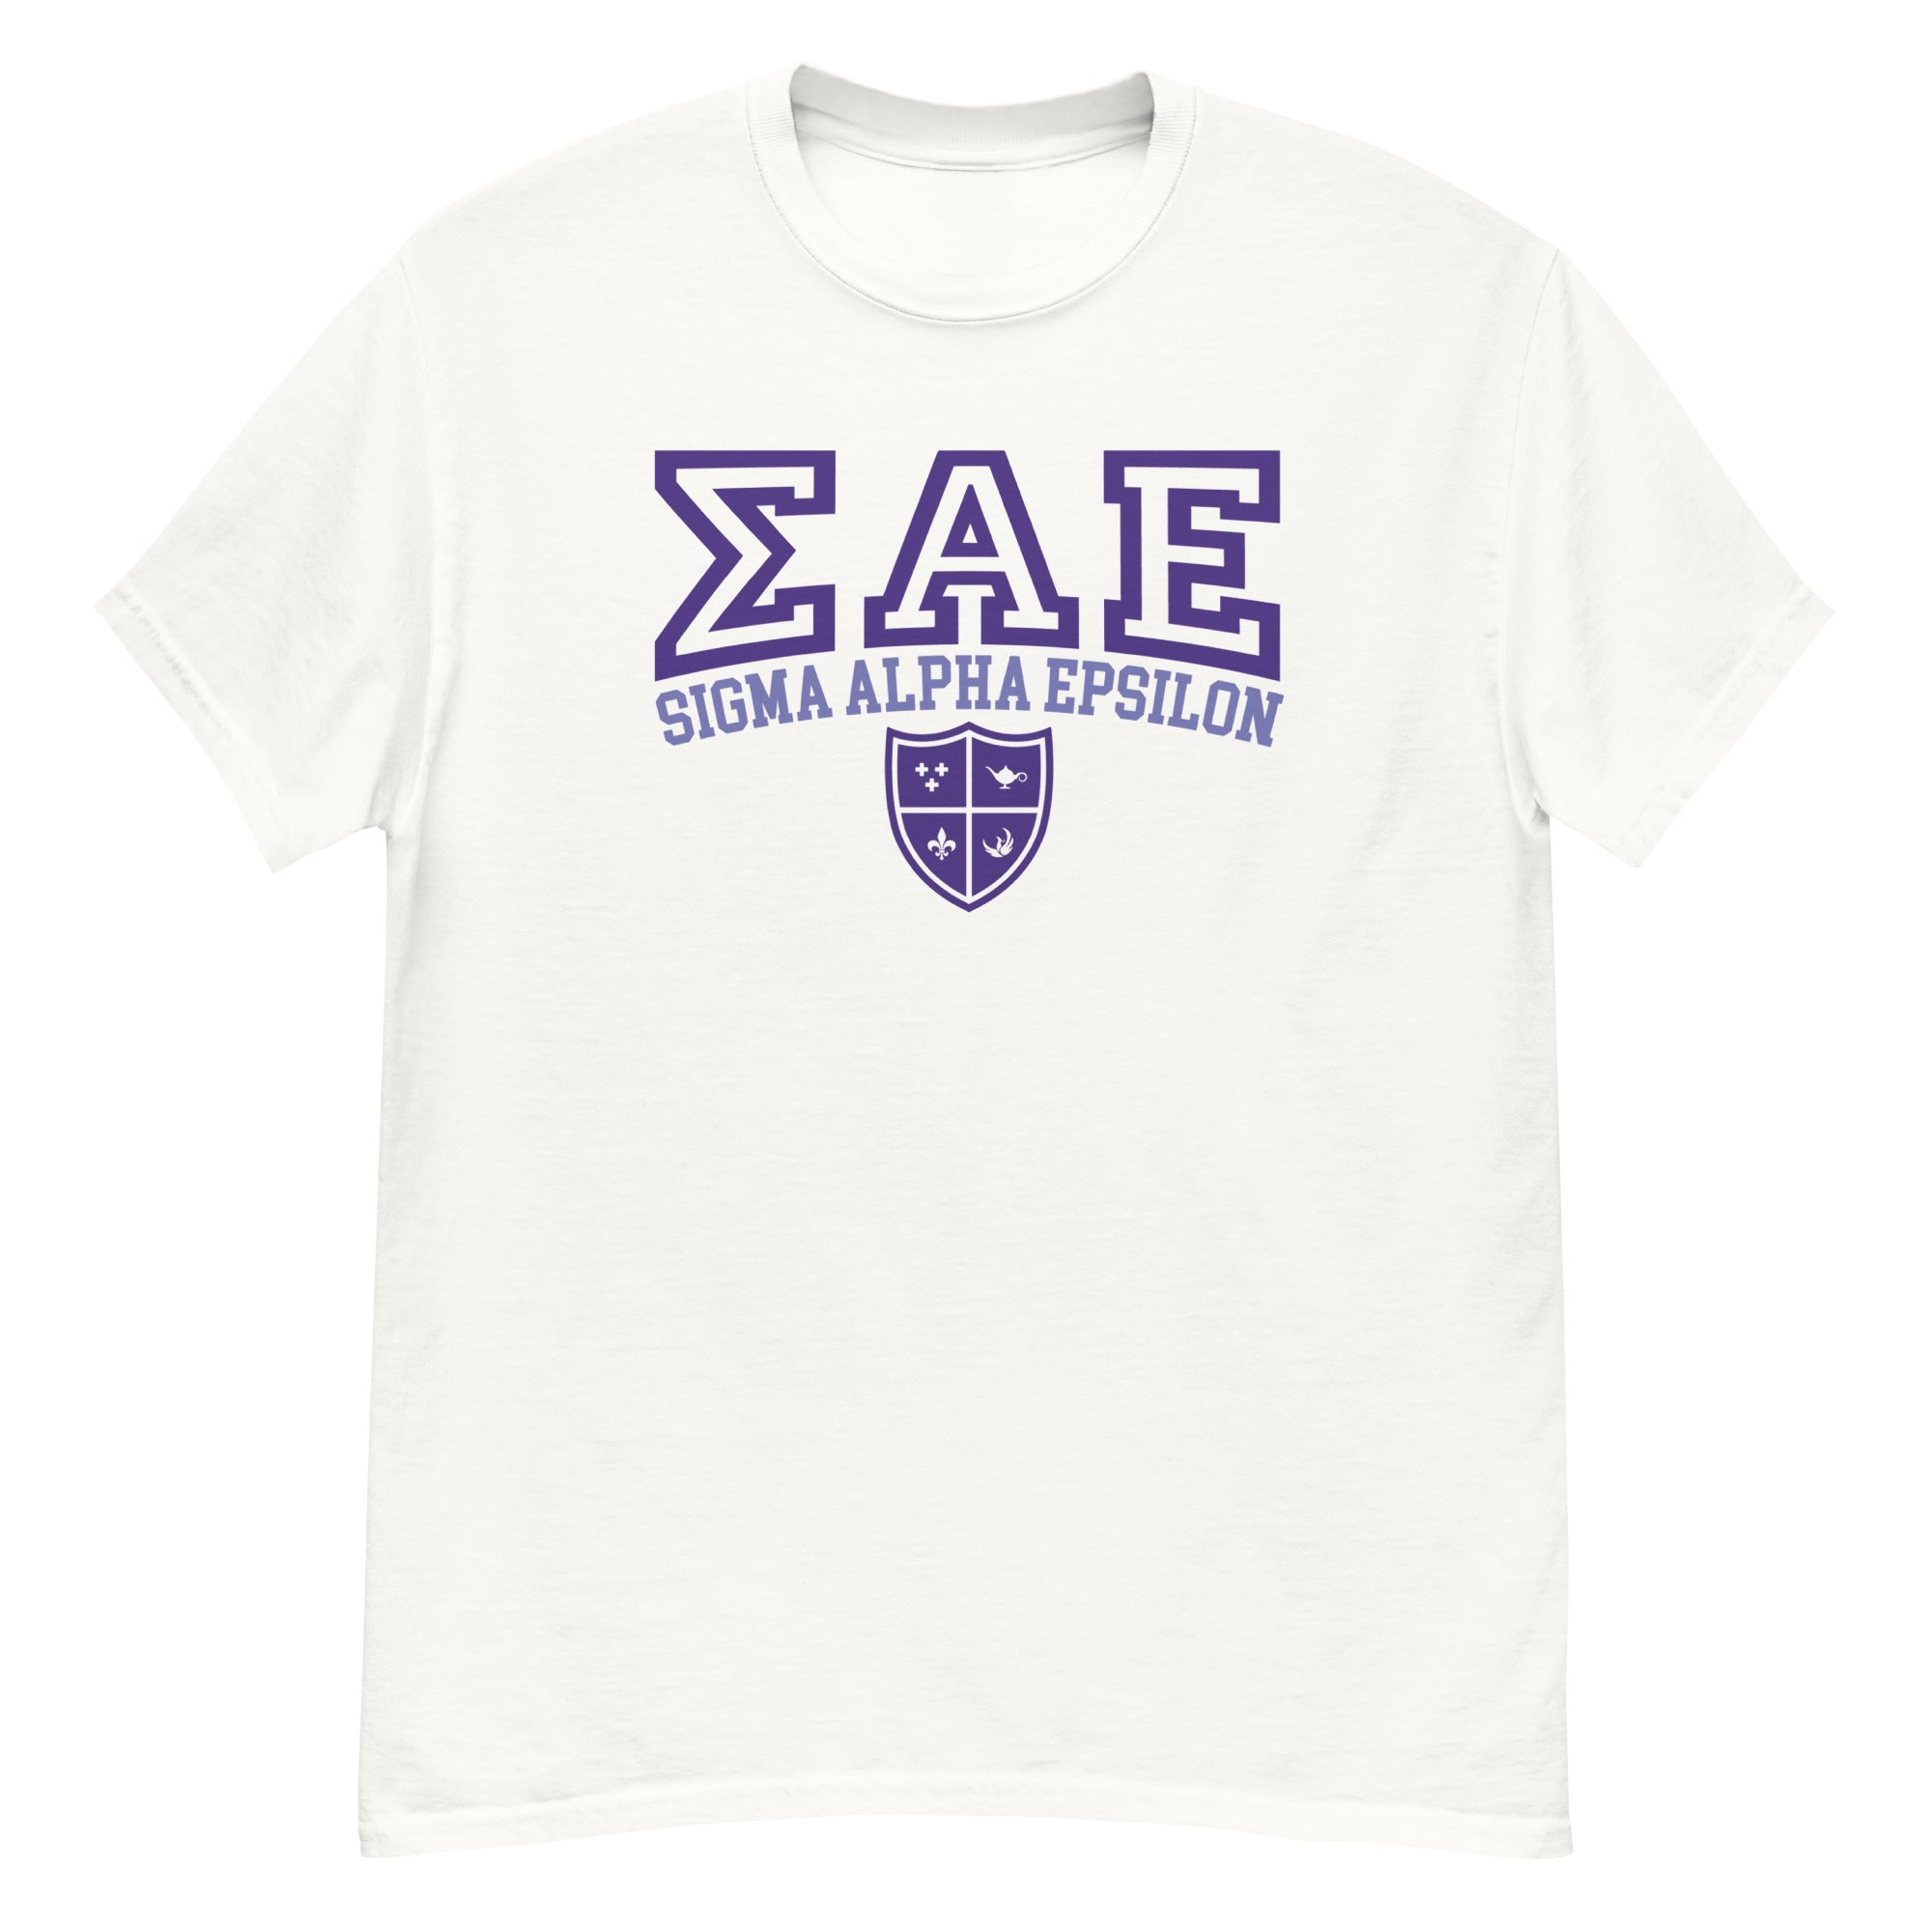 LIMITED RELEASE: SAE Back to School Tee - The Sigma Alpha Epsilon Store